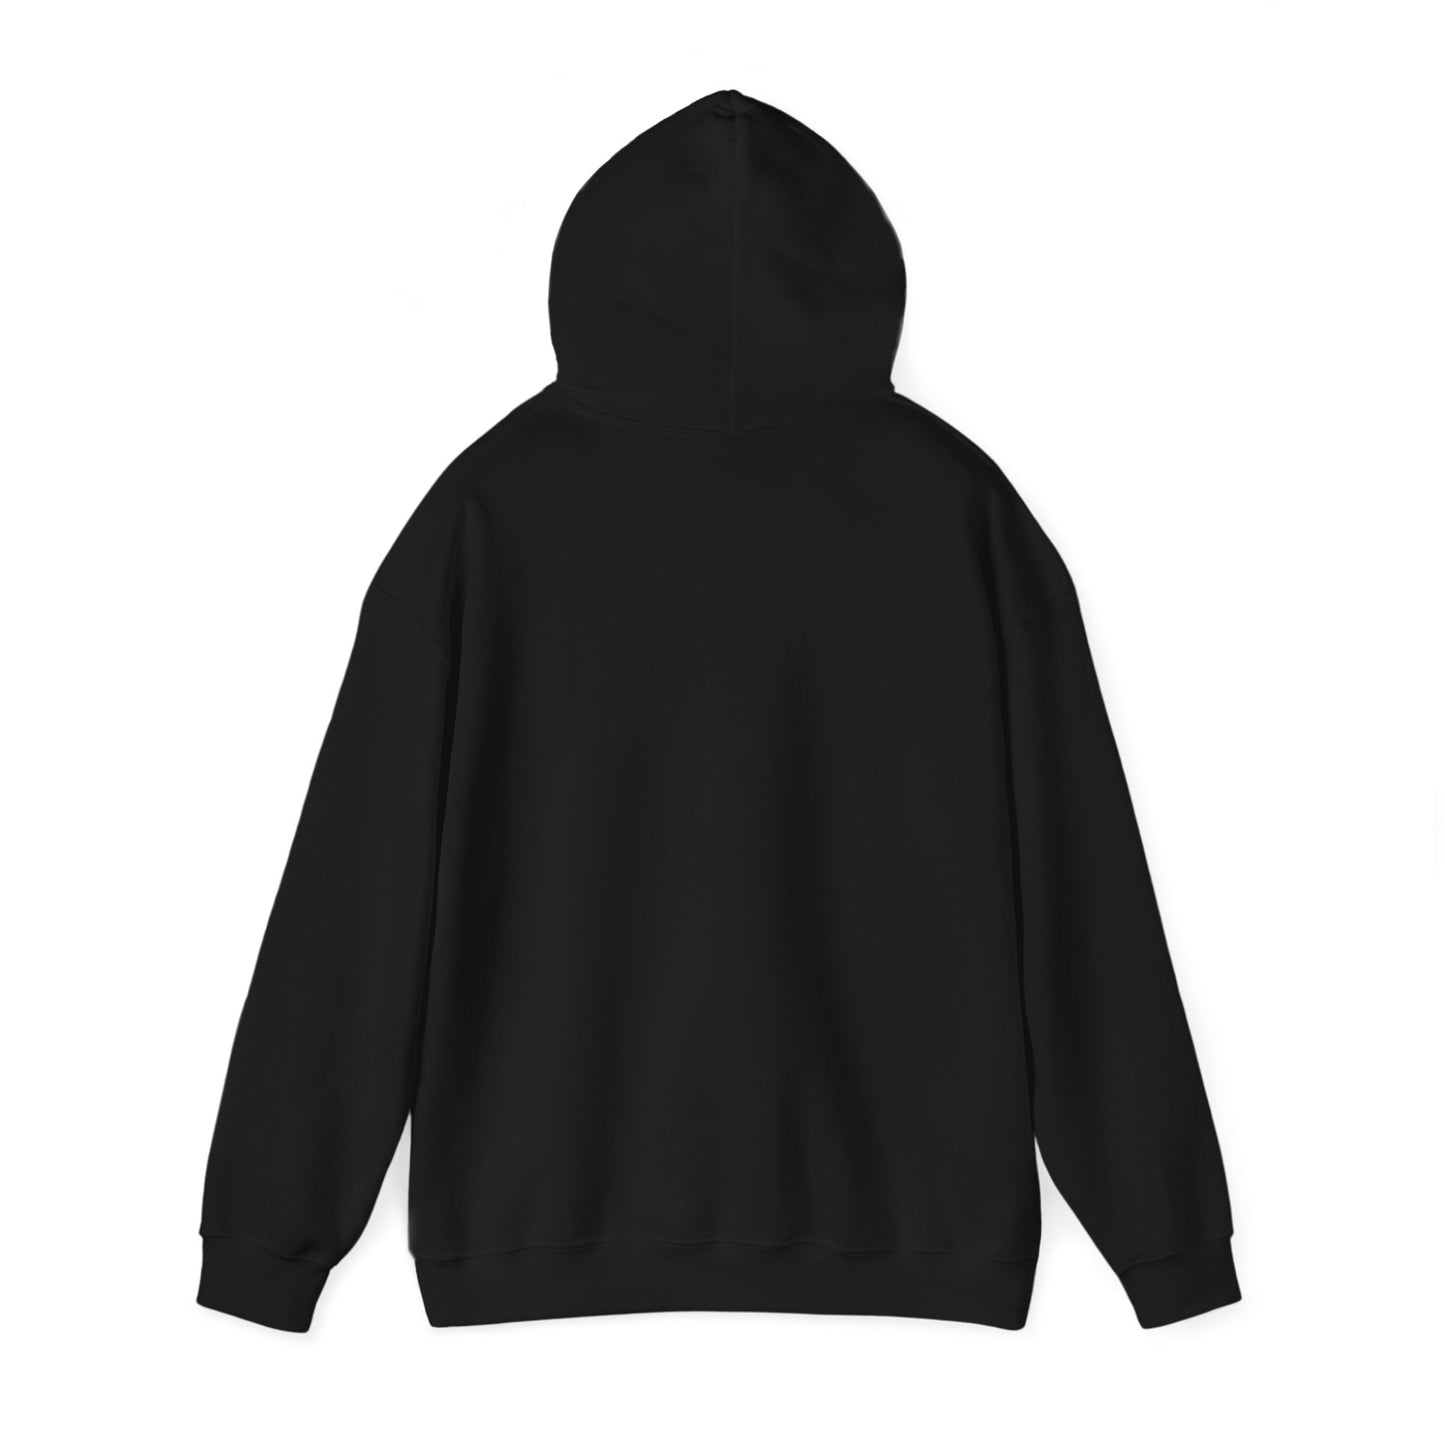 MPLFY Classic Fit AmplifyDestroy Print Hoodie